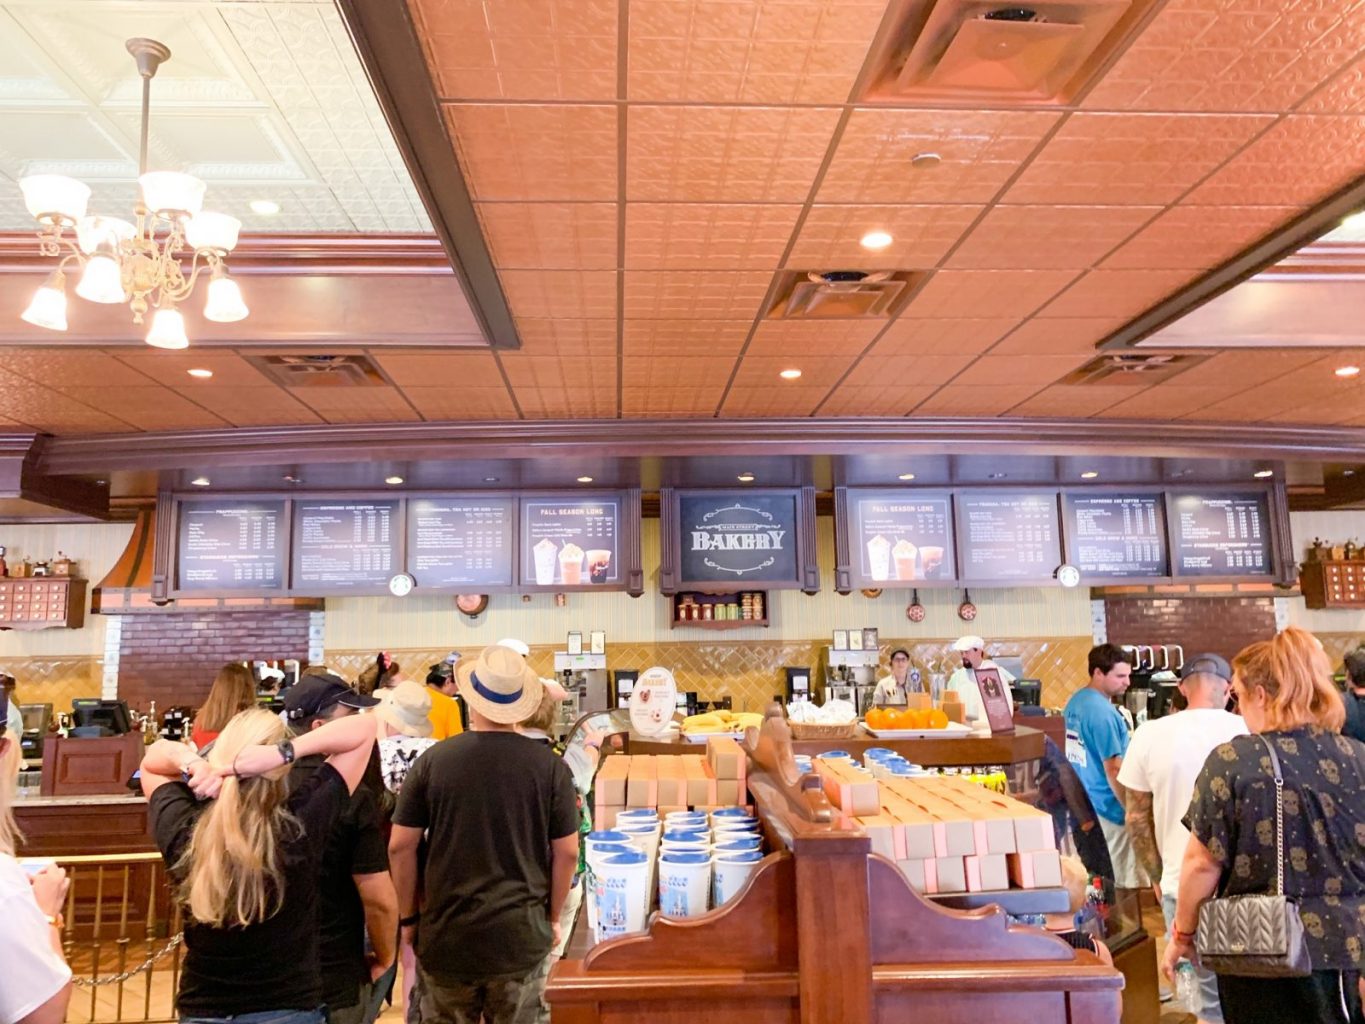 The inside of Main Street Bakery in Magic Kingdom is designed to look like a turn of the century space complete with rich golden colors and an airy atmosphere. 